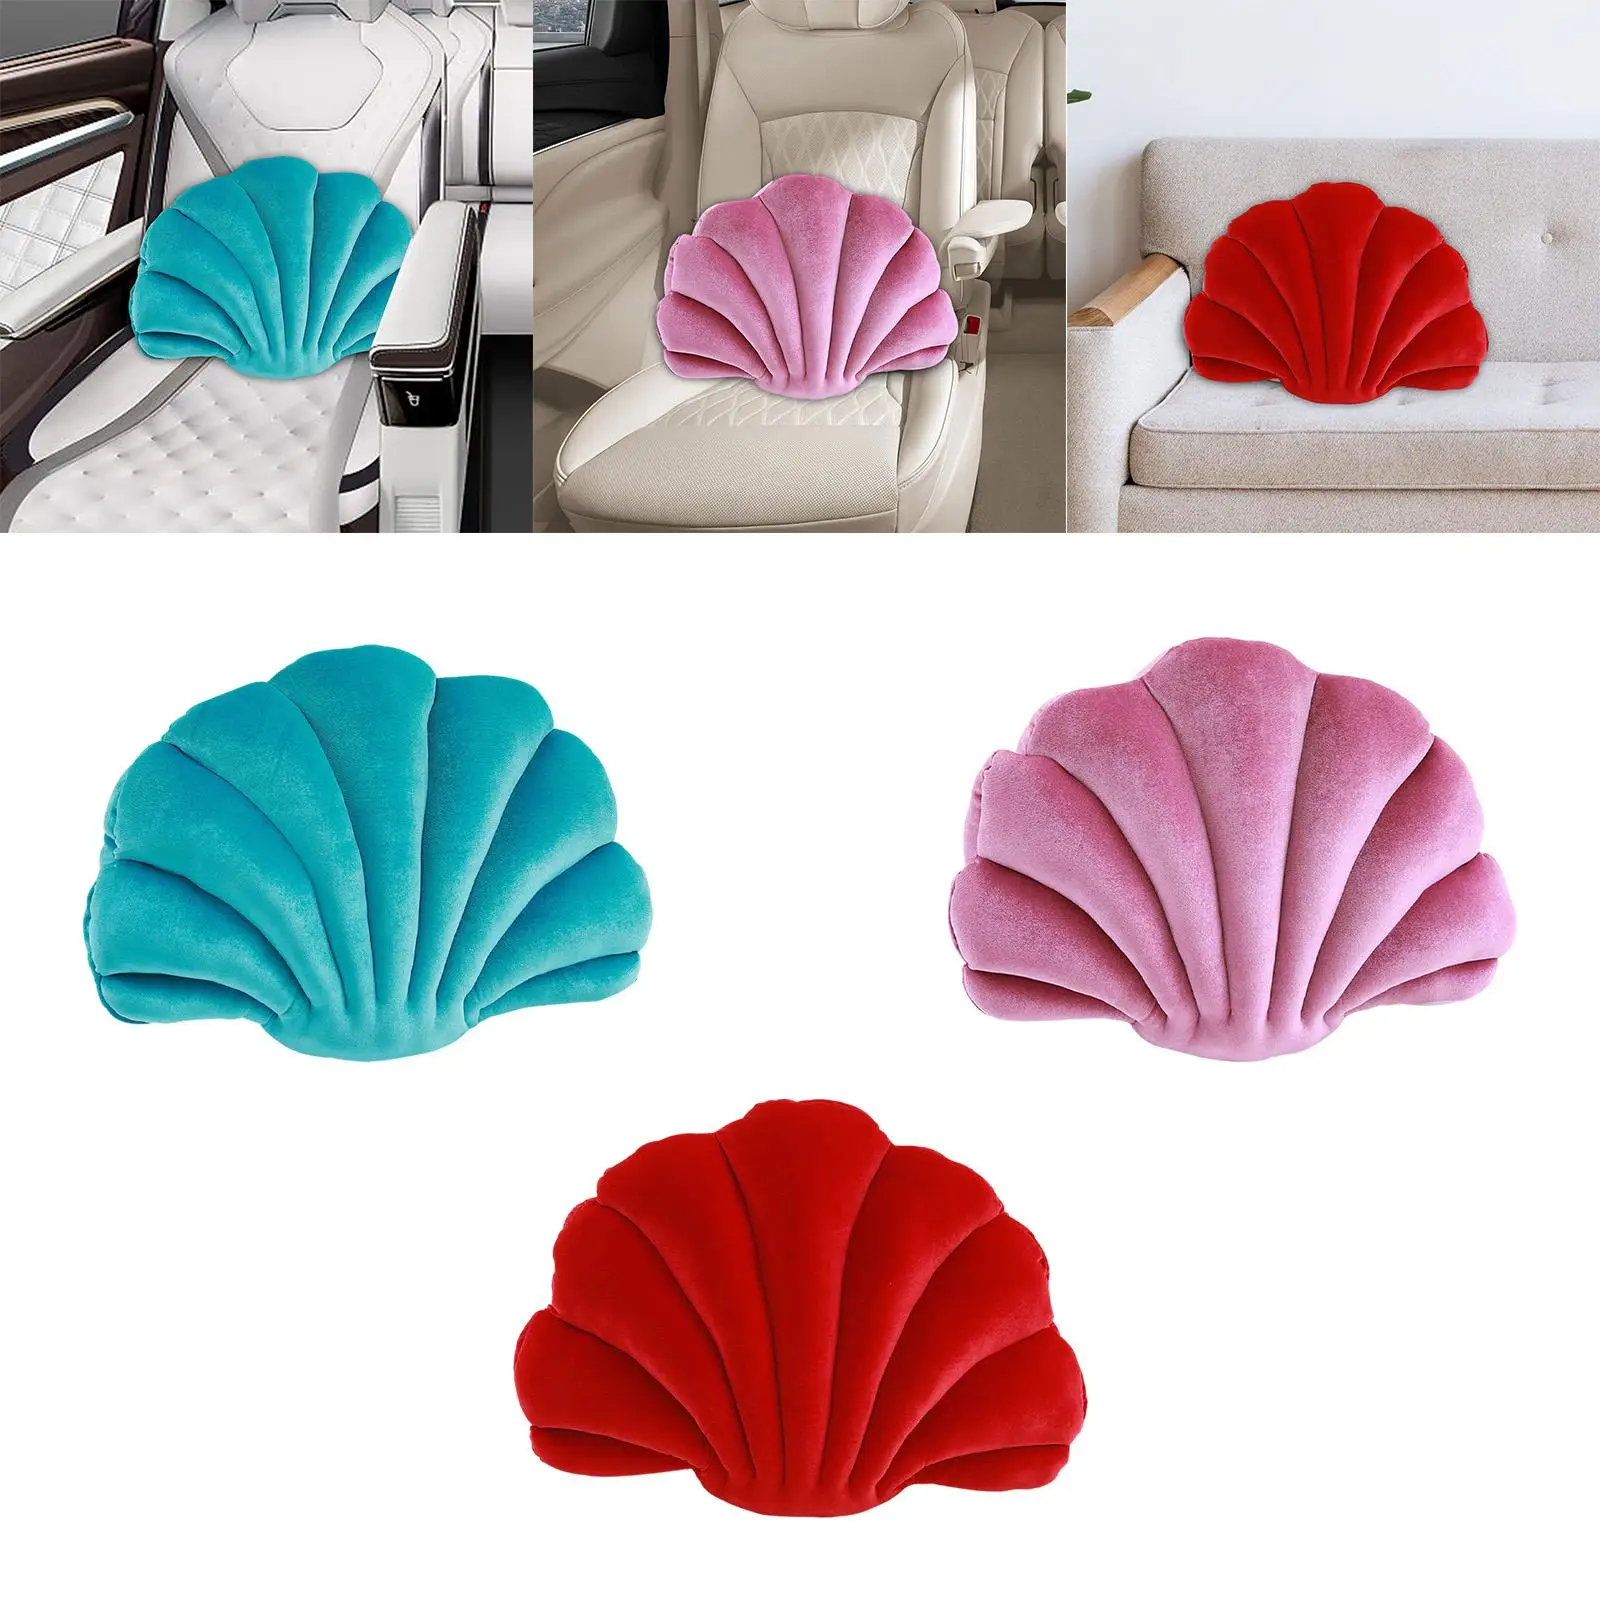 Seashell Shaped Pillow Couch Cushion for Car Living Room Home Office